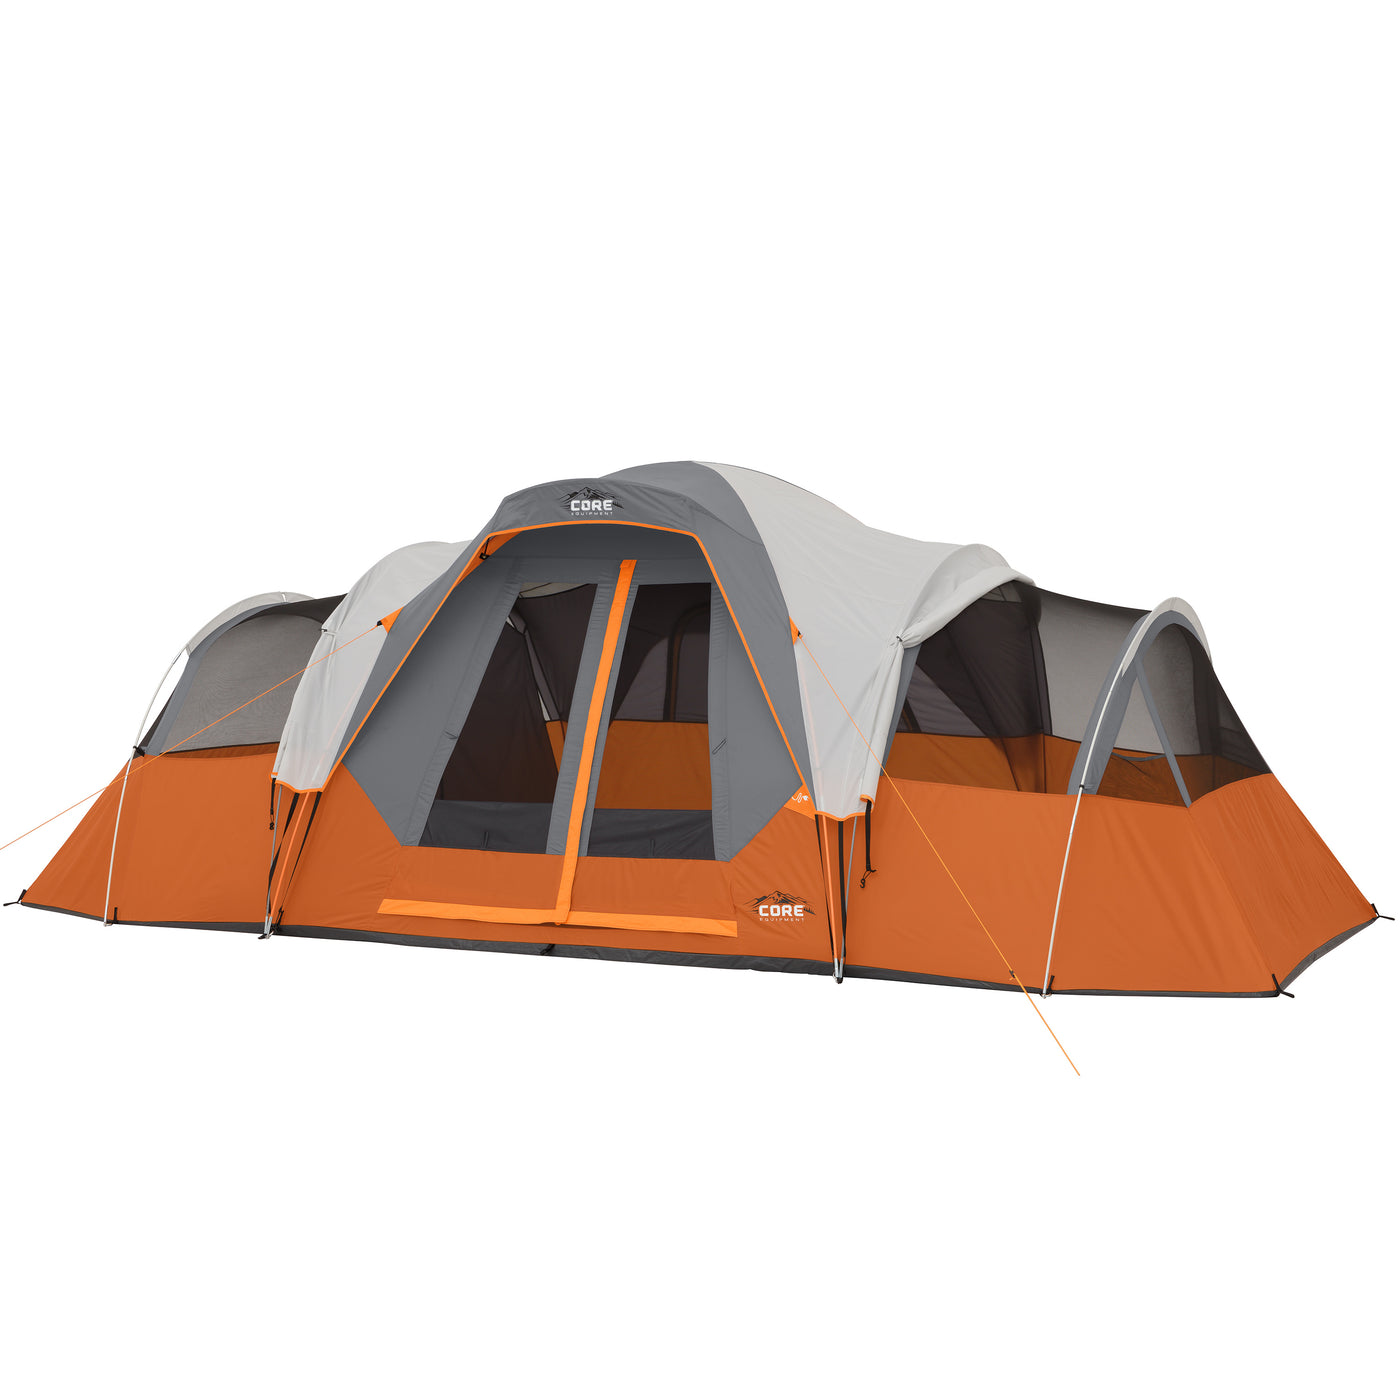 Image of tent with versitile rainfly rolled on right and left sides while still fully attached to top of tent